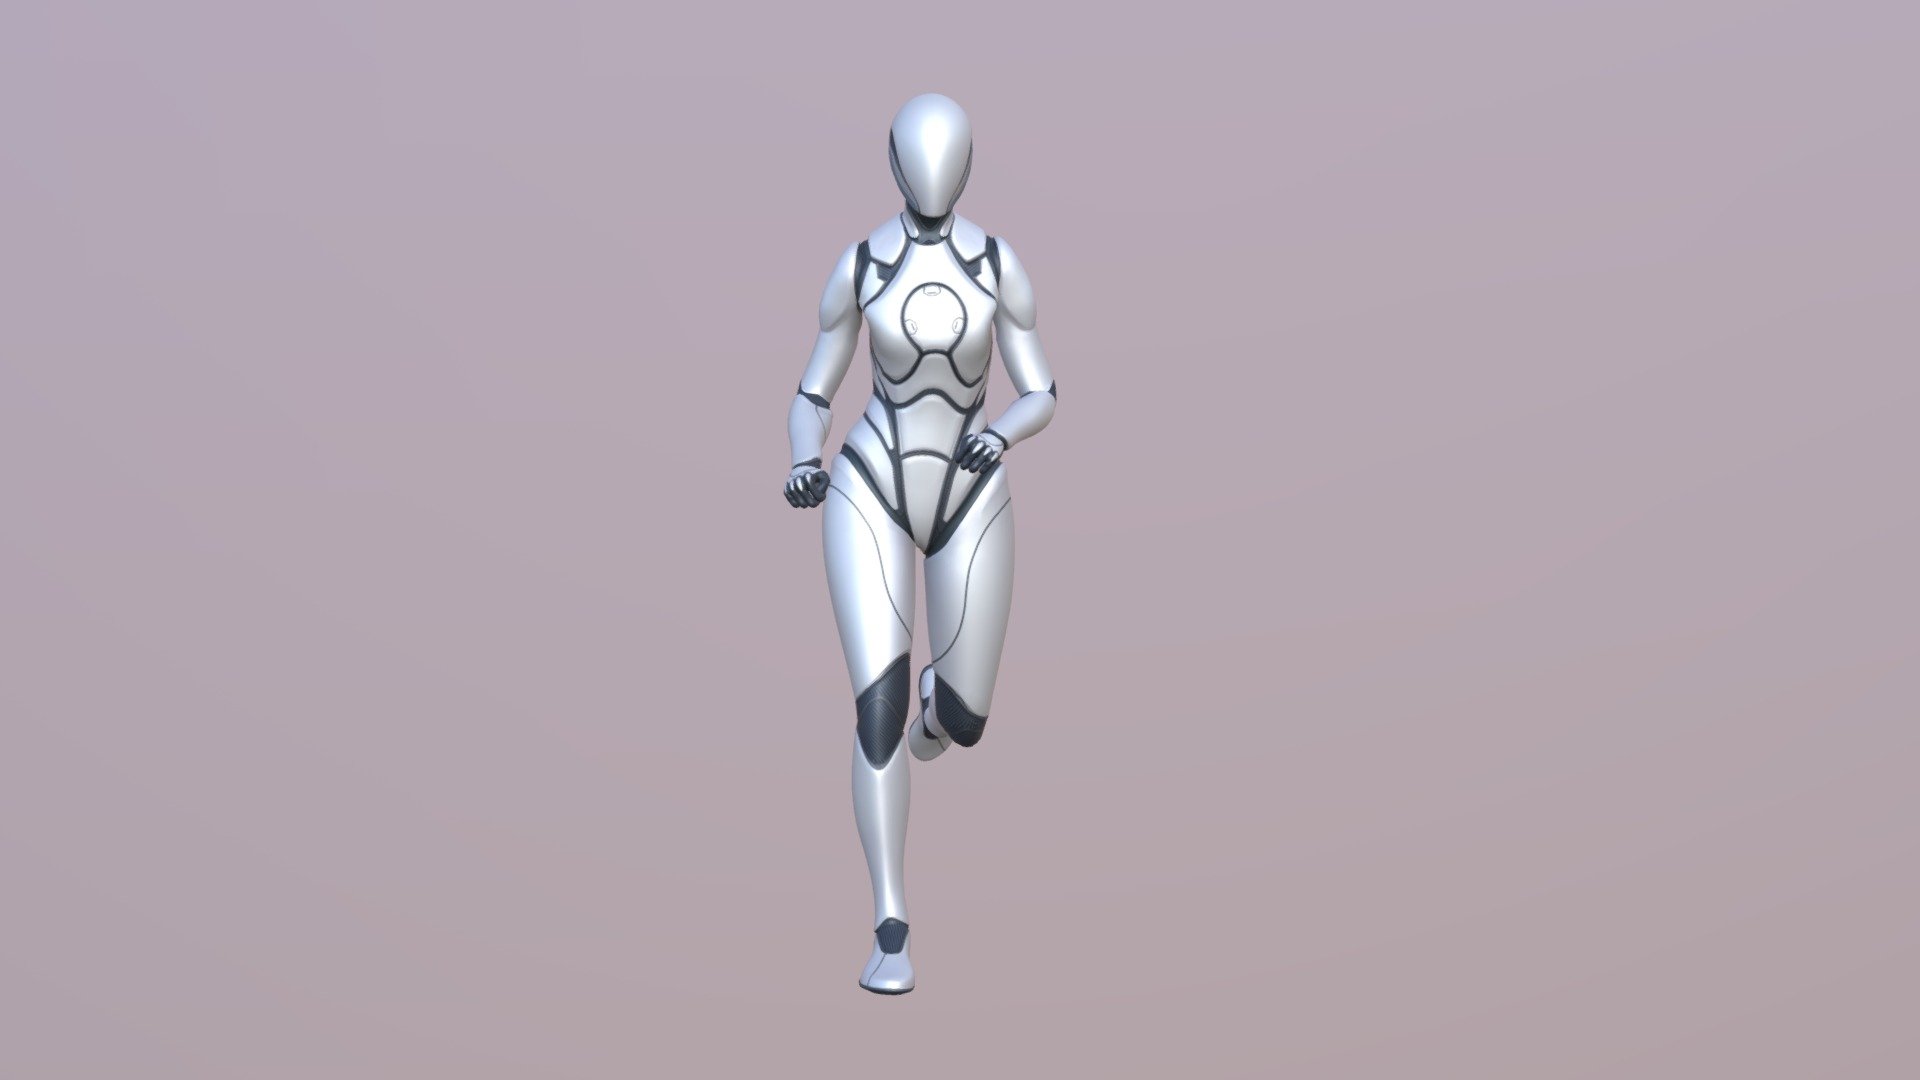 ANIMATION PREVIEW
* UE4- https://youtu.be/nt0fBIPYgDk
* UNITY- https://youtu.be/yrJnP78r_gA

FOR FULL DETAILS+SKELETON TREE- LINK



YOU CAN ALSO DOWNLOAD SAME RIG CHARACTERS FROM MY STORE 
CHECK MY STORE FOR MORE ANIMATIONS,CHARACTERS,BASE MESH,OTHER 3D PRODUCTS


FEATURES




UNREAL MANNEQUIN, UNITY DEFAULT CHARACTER SUPPORT THIS ANIMATIONS

SKELETON : UNREAL ENGINE EPIC SKELETON RIG+EXTRA BONES (SKELETON TREE SHOWED IN THE ABOVE LINK)  

NUMBER OF ANIMATIONS :50   

ANIMATIONS TYPE : AVAILABLE IN BOTH ROOT MOTION &amp; IN PLACE  DEFAULT 

AVAILABLE SKIN POSES: T-POSE,UE4-POSE,A-POSE

ANIMATIONS AVAILABLE FILE FORMATS




UNREAL ENGINE-4.25

UNITY-2022

FBX

CHARACTER  AVAILABLE FILE FORMATS




UNREAL ENGINE-4.25

UNITY-2022

3DS MAX-2017

MAYA-2017

BLENDER-3.2

CINEMA 4D-R21

FBX-BOTH Z-UP &amp; Y-UP
 - 50 Female Animations - Buy Royalty Free 3D model by jasirkt 3d model